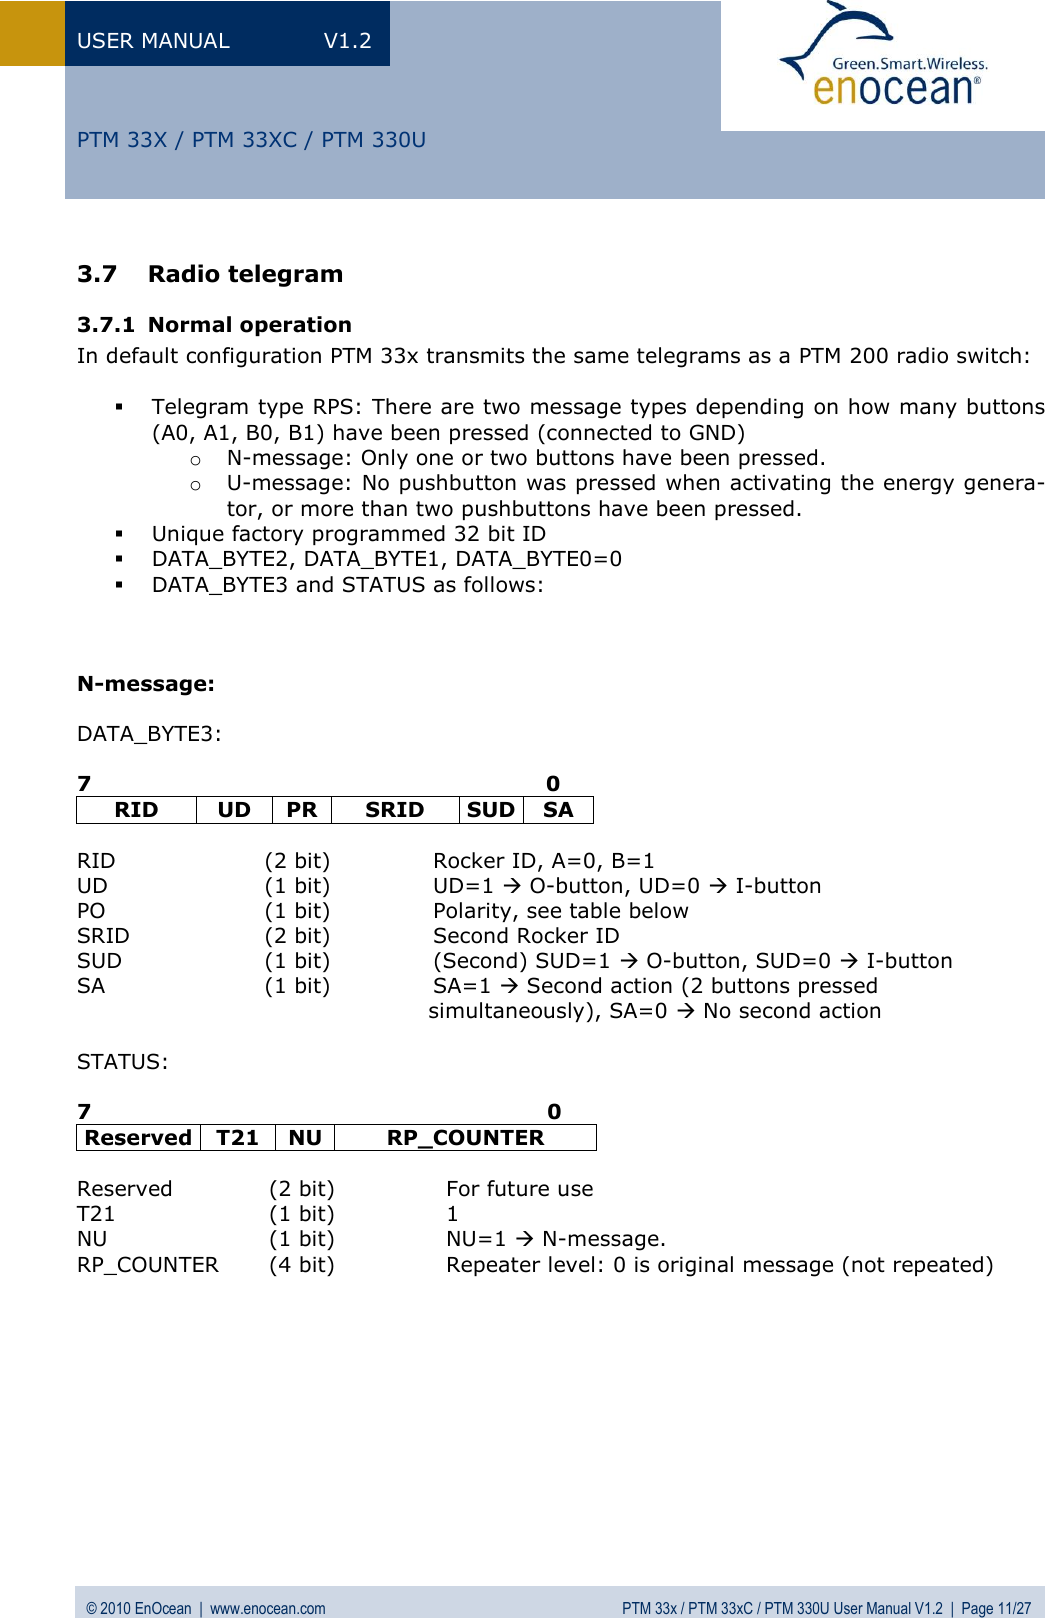 USER MANUAL  V1.2 © 2010 EnOcean  |  www.enocean.com  PTM 33x / PTM 33xC / PTM 330U User Manual V1.2  |  Page 11/27   PTM 33X / PTM 33XC / PTM 330U 3.7 Radio telegram 3.7.1 Normal operation In default configuration PTM 33x transmits the same telegrams as a PTM 200 radio switch:   Telegram type RPS: There are two message types depending on how many buttons (A0, A1, B0, B1) have been pressed (connected to GND) o N-message: Only one or two buttons have been pressed. o U-message: No pushbutton was pressed when activating the energy genera-tor, or more than two pushbuttons have been pressed.  Unique factory programmed 32 bit ID  DATA_BYTE2, DATA_BYTE1, DATA_BYTE0=0  DATA_BYTE3 and STATUS as follows:    N-message:  DATA_BYTE3:  7                                                                0 RID UD PR SRID SUD SA  RID  (2 bit)  Rocker ID, A=0, B=1  UD  (1 bit)  UD=1  O-button, UD=0  I-button PO  (1 bit)  Polarity, see table below SRID  (2 bit)  Second Rocker ID SUD  (1 bit)  (Second) SUD=1  O-button, SUD=0  I-button SA  (1 bit)  SA=1  Second action (2 buttons pressed                                                  simultaneously), SA=0  No second action  STATUS:  7                                                                0 Reserved T21 NU RP_COUNTER  Reserved  (2 bit)   For future use T21  (1 bit)  1 NU  (1 bit)  NU=1  N-message. RP_COUNTER  (4 bit)  Repeater level: 0 is original message (not repeated)           